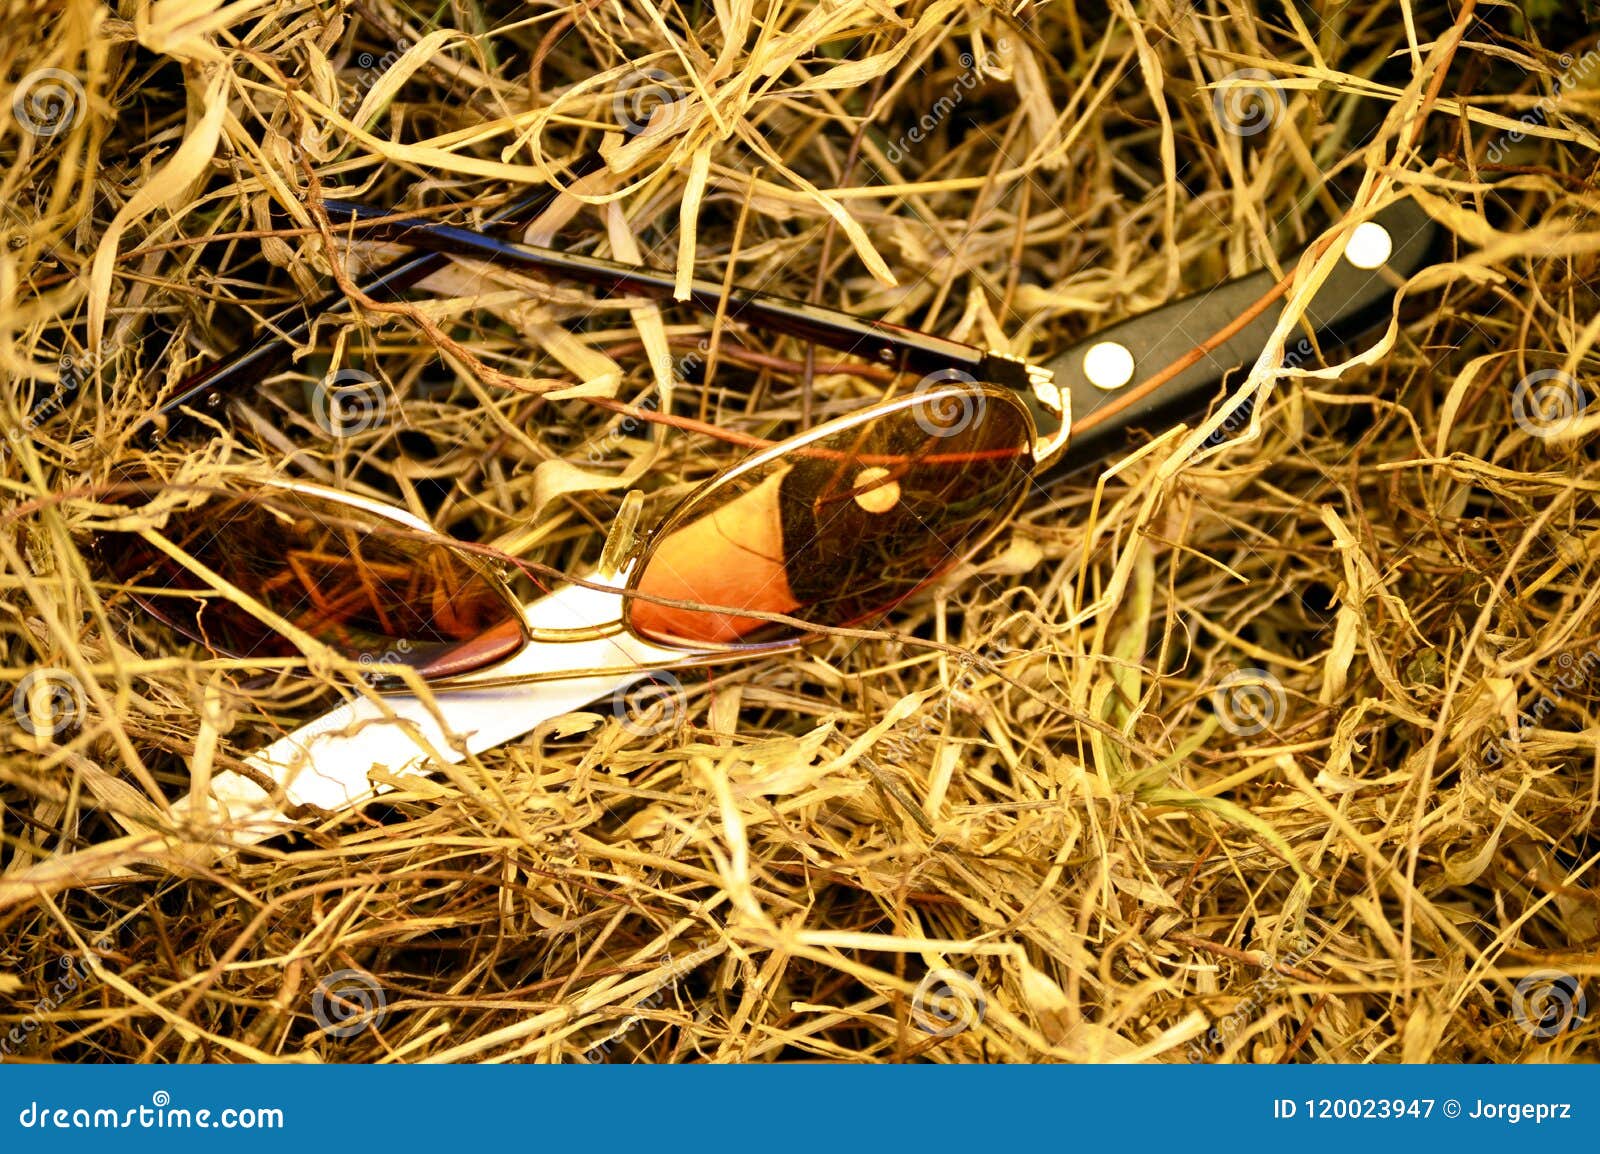 Glasses and Knife on Dry Grass Stock Image - Image of concept, homicide ...